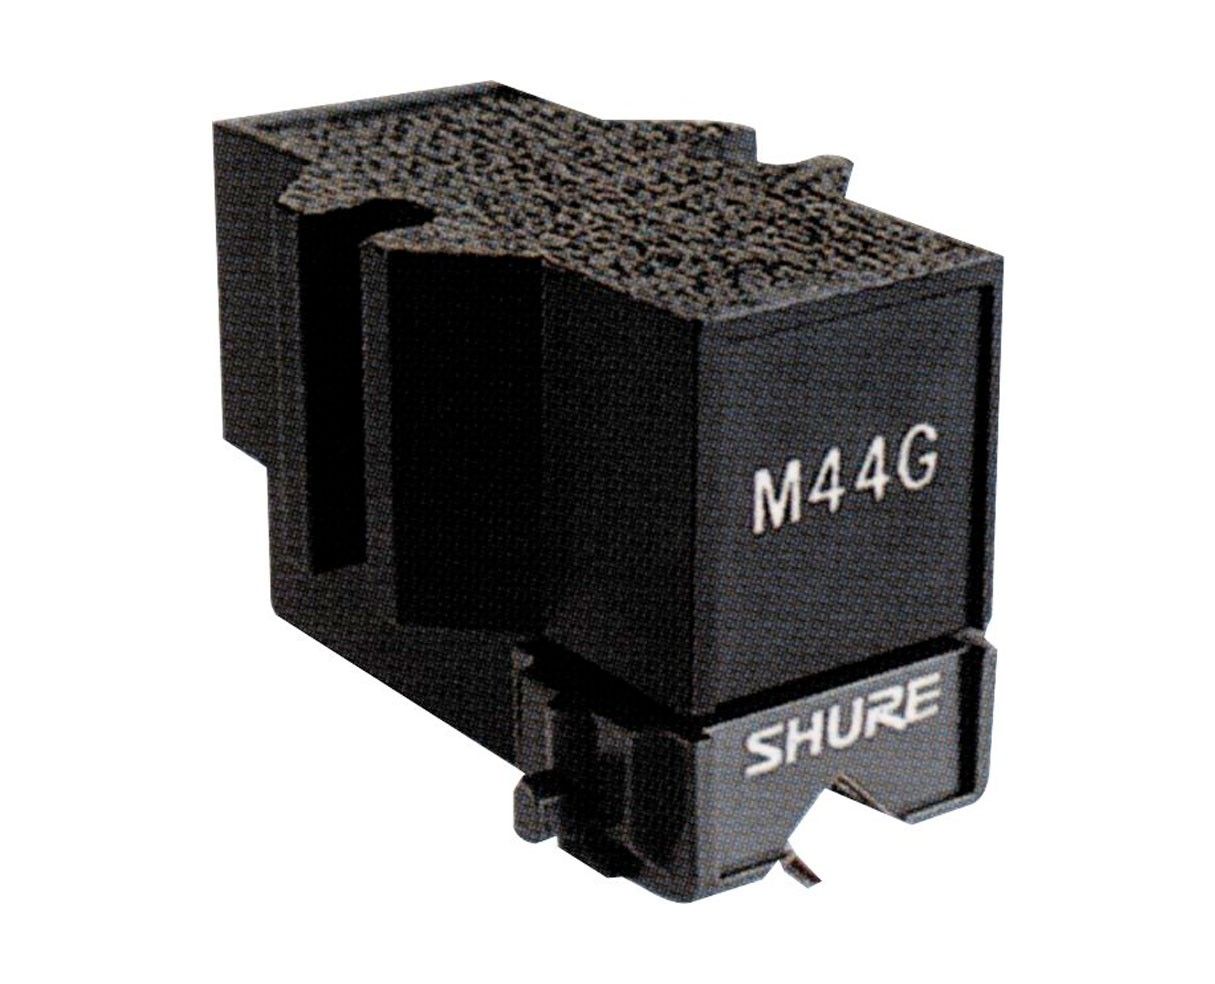 SHURE M44G - CLUB/RAVE - attacco standard | Musical Store 2005